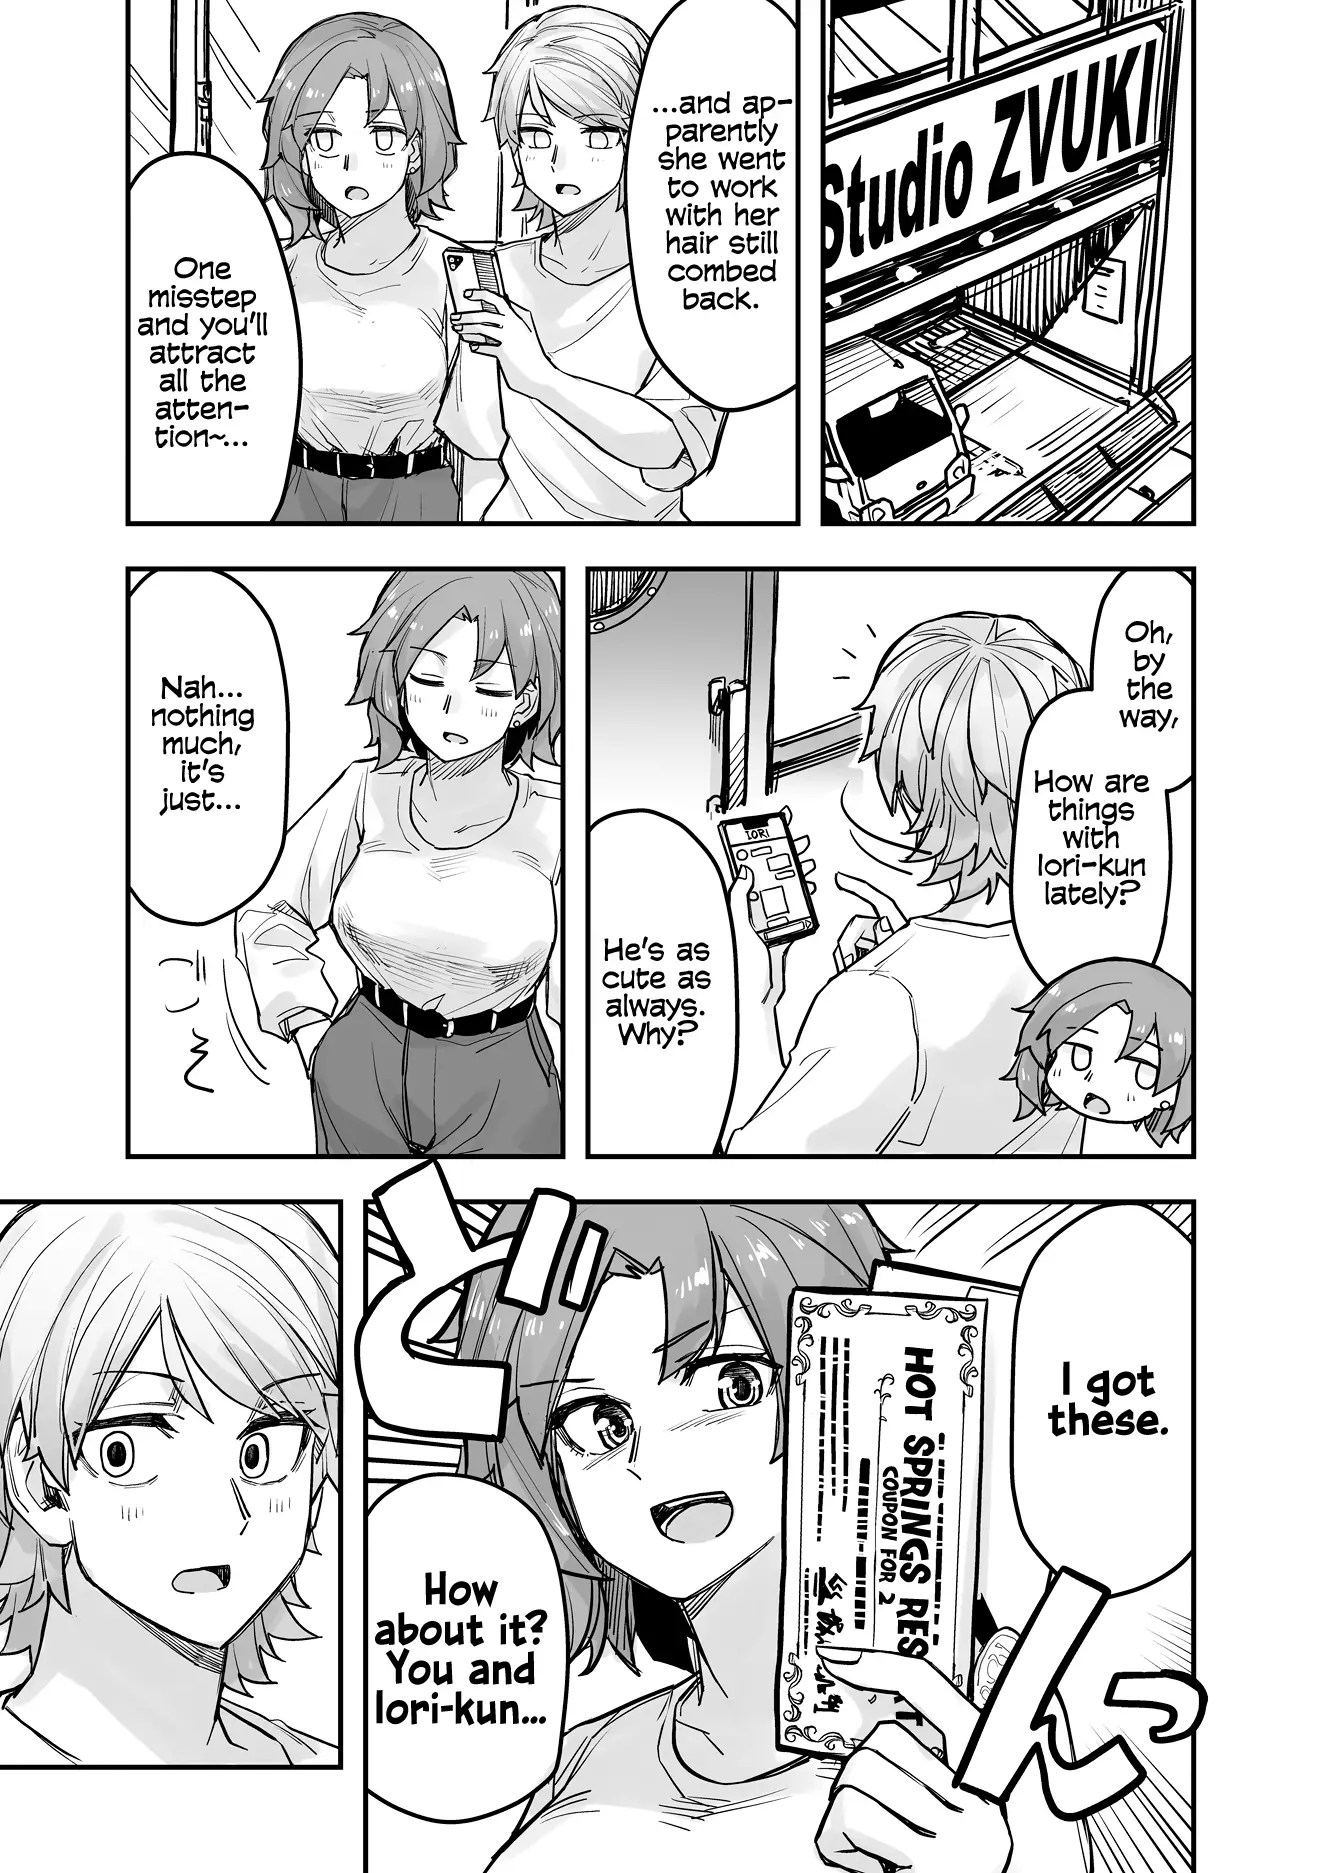 While Cross-Dressing, I Was Hit On By A Handsome Guy! - 79 page 1-c8c005e3